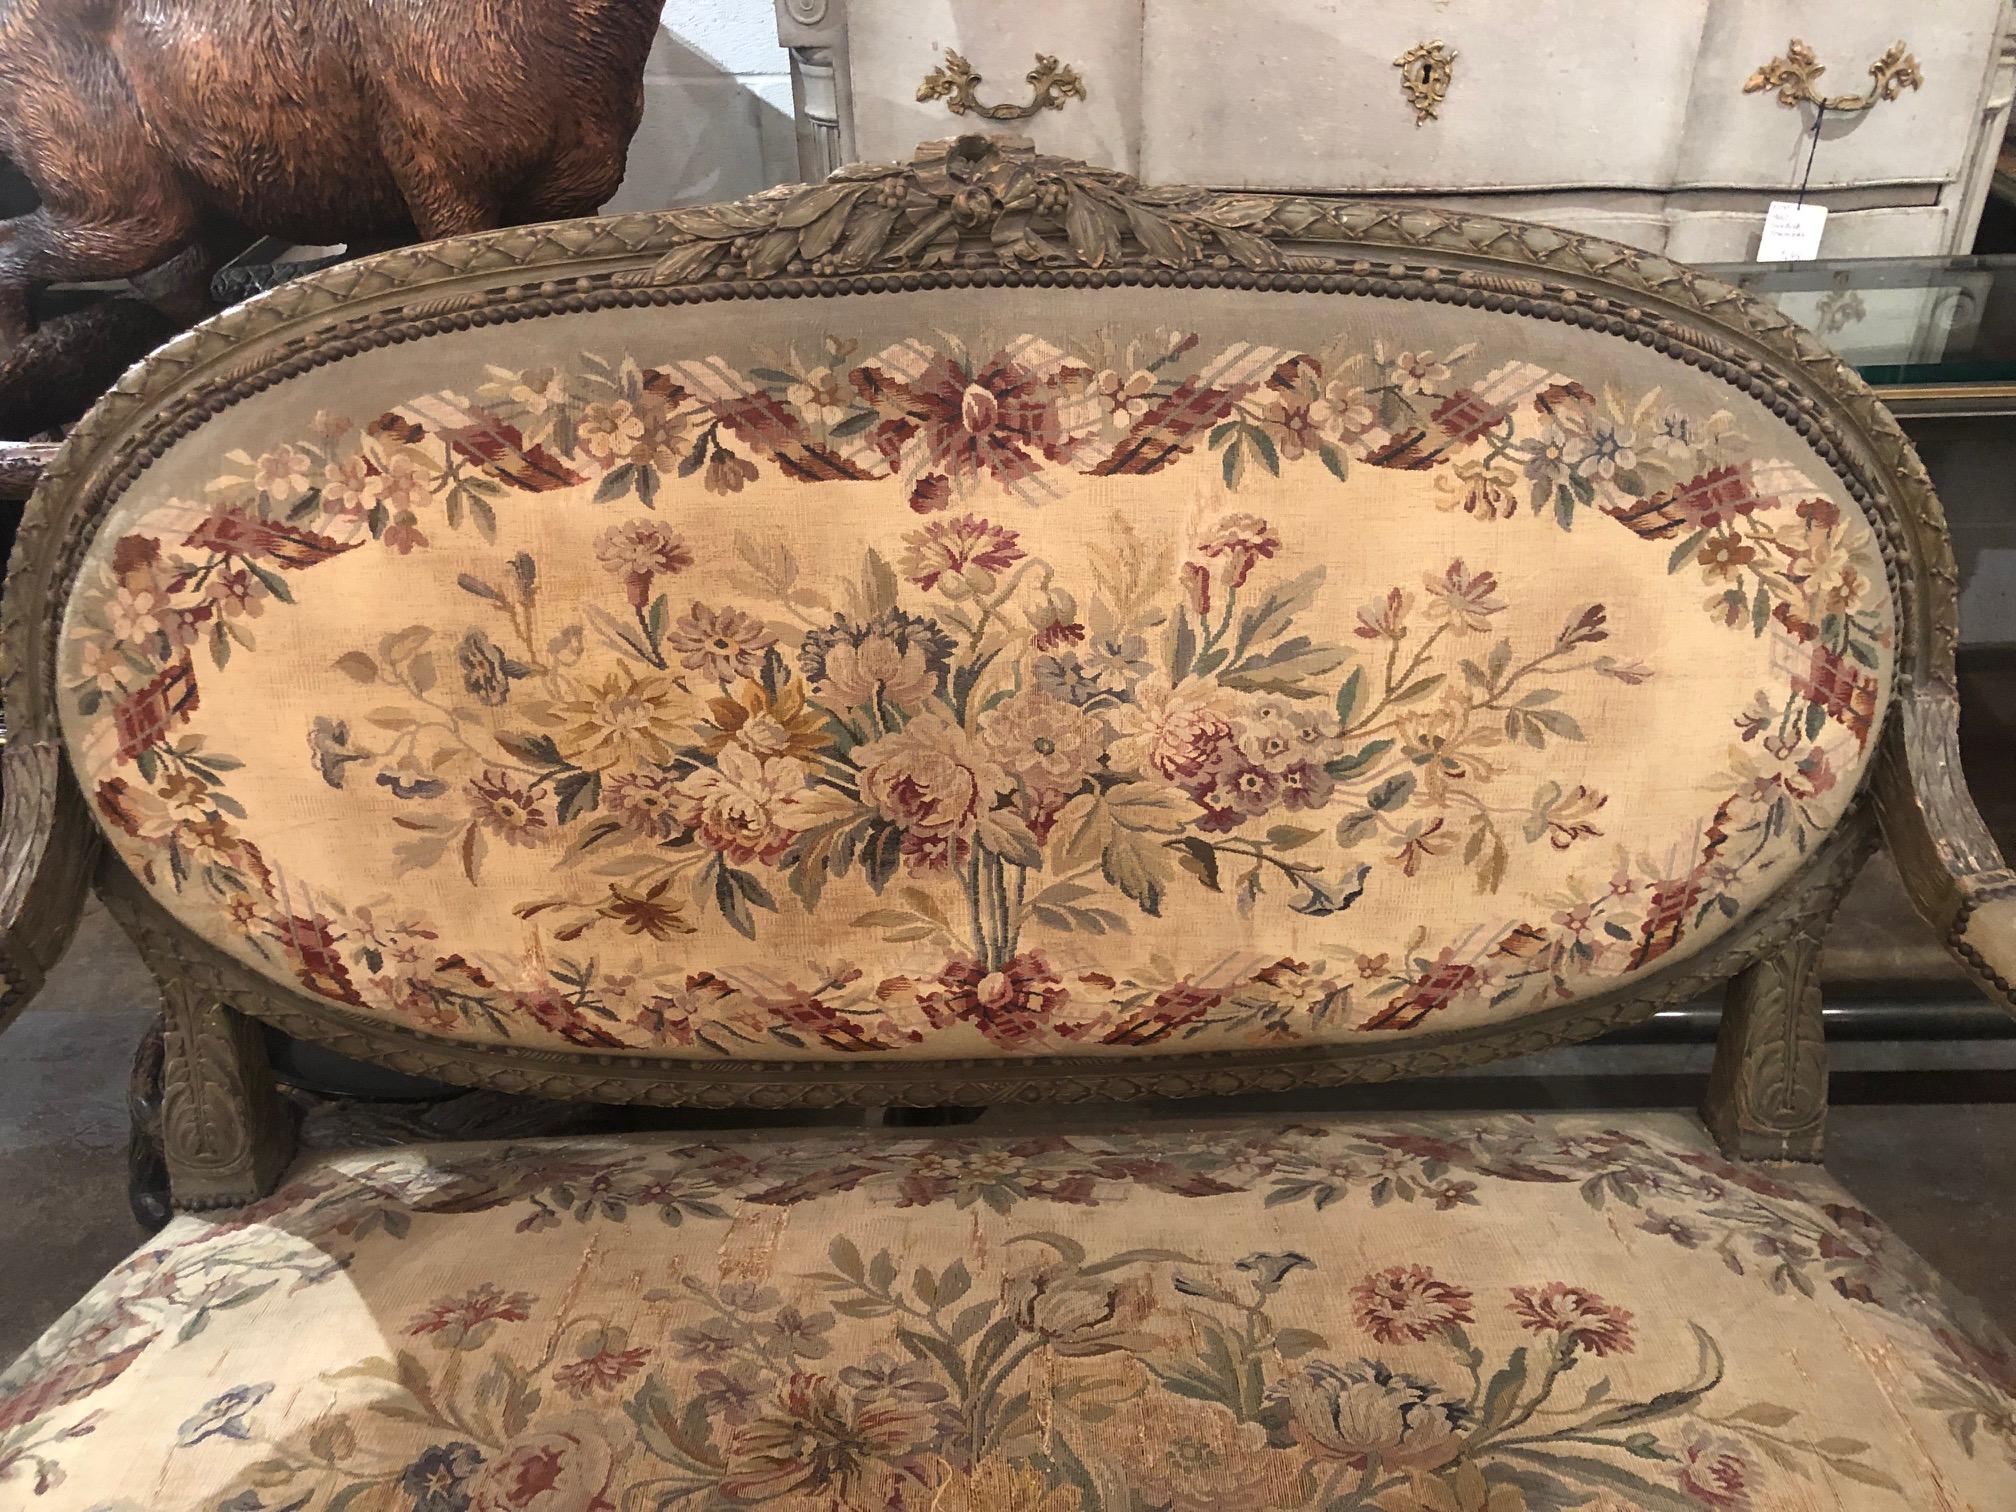 Fabulous 19th century French Louis XVI style settee with grayish painted finish. The crest and skirt superbly with hand-carved leaf clusters and leaf sprays. Upholstered in a beautiful and colorful Aubusson style floral motif tapestry. The entire on